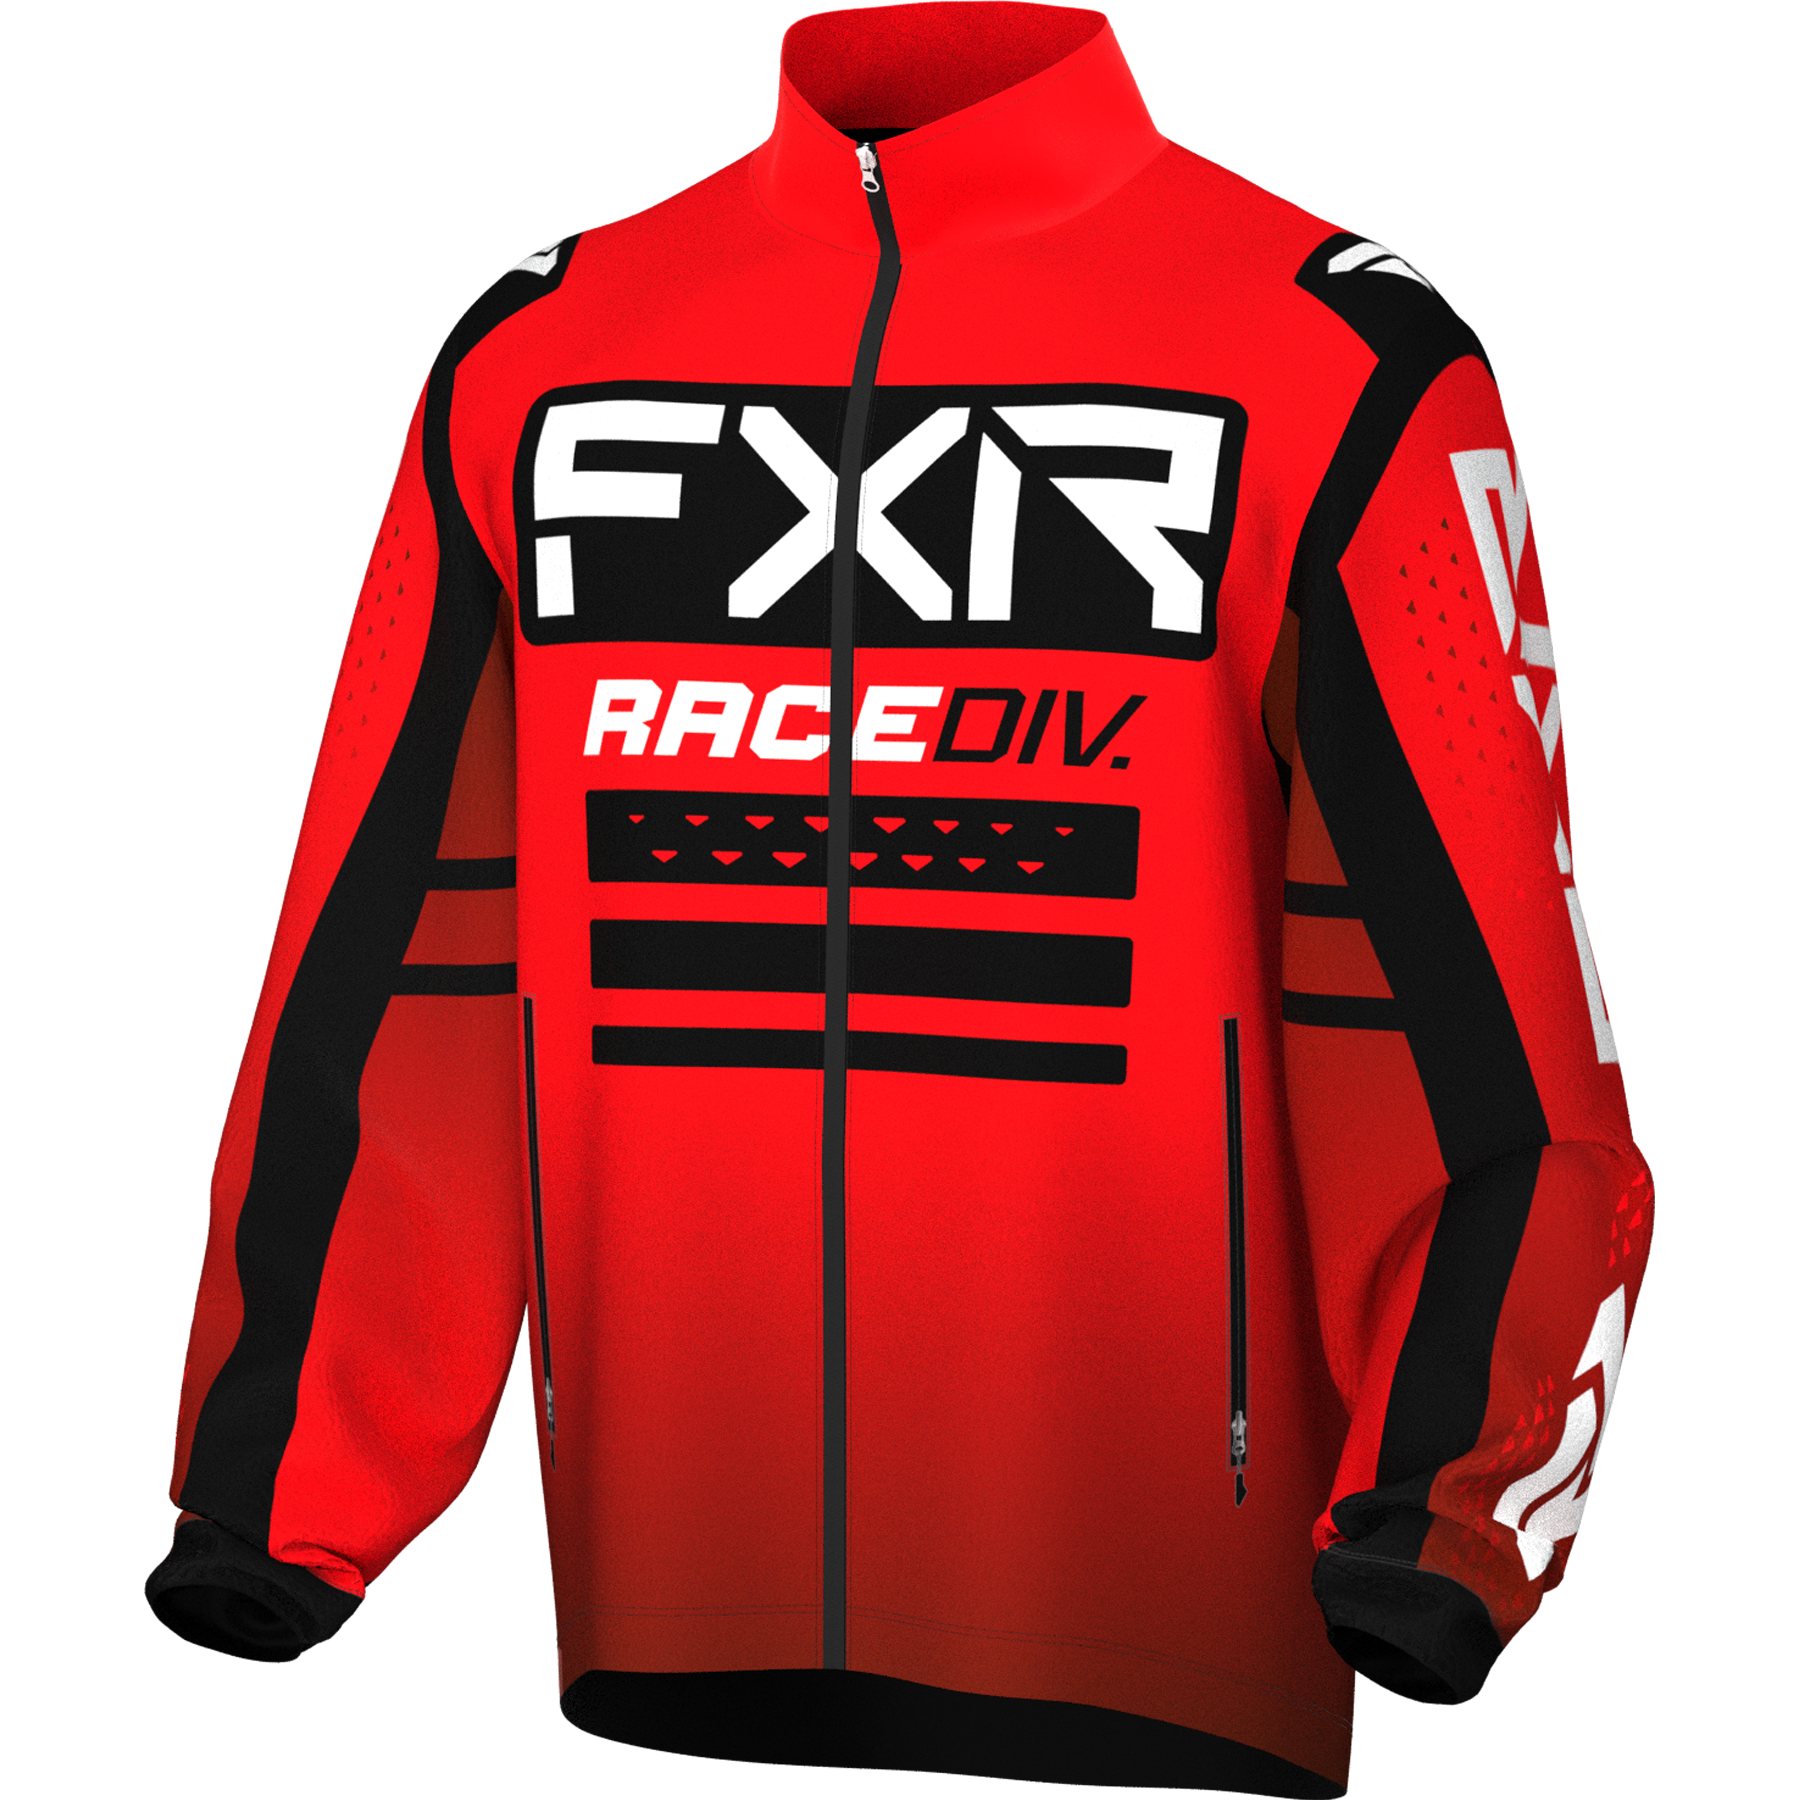 fxr racing noninsulated jackets for men rr lite